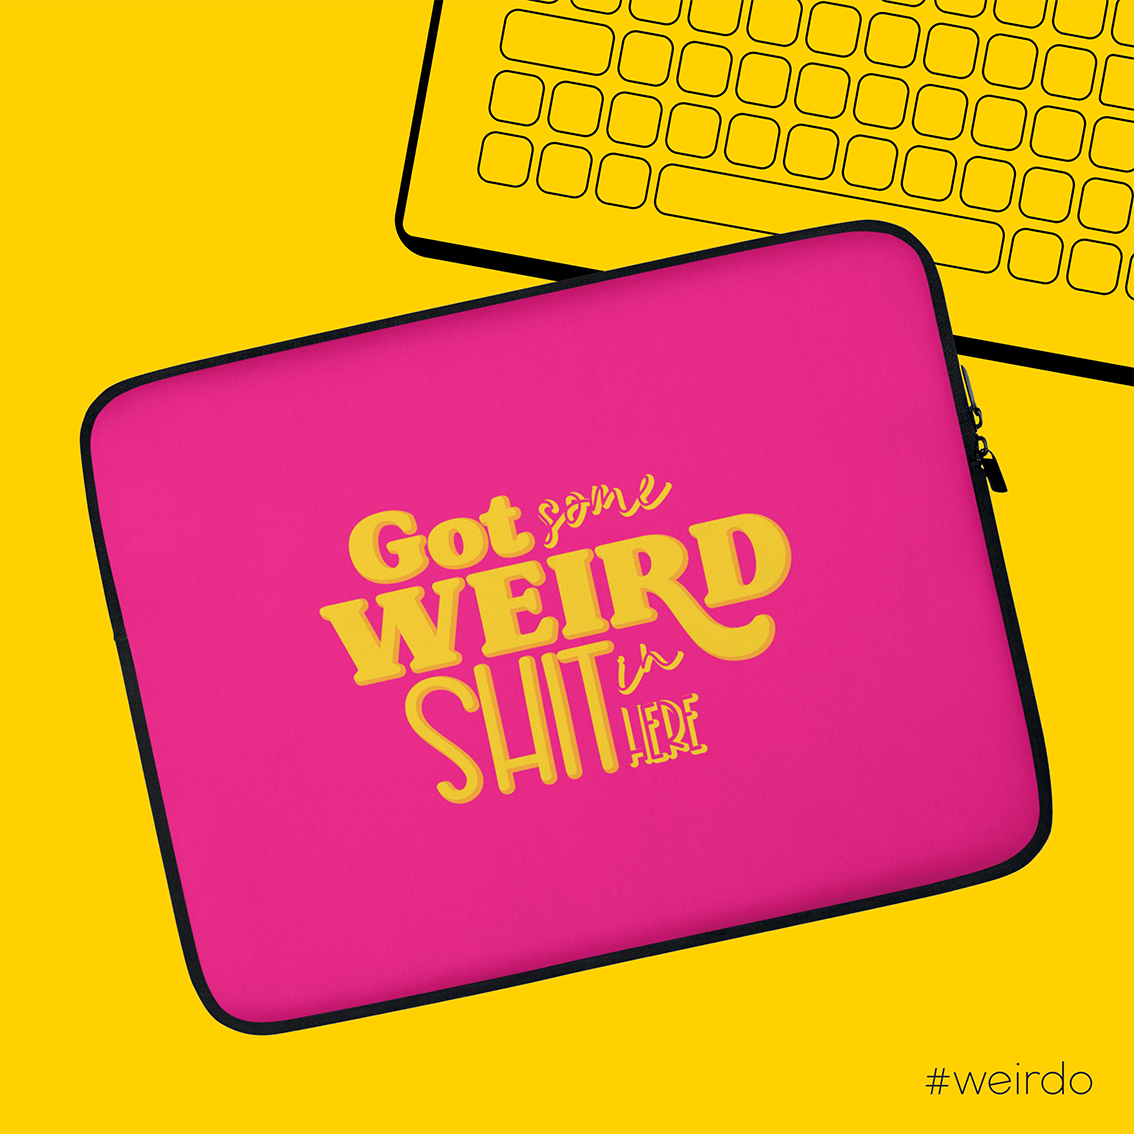 #WEIRDO | Awesome laptop sleeve for 13 and 15 inch laptops! Bright Pink and Yellow sleeve to protect your laptop with all the weird shit you are hiding in there!